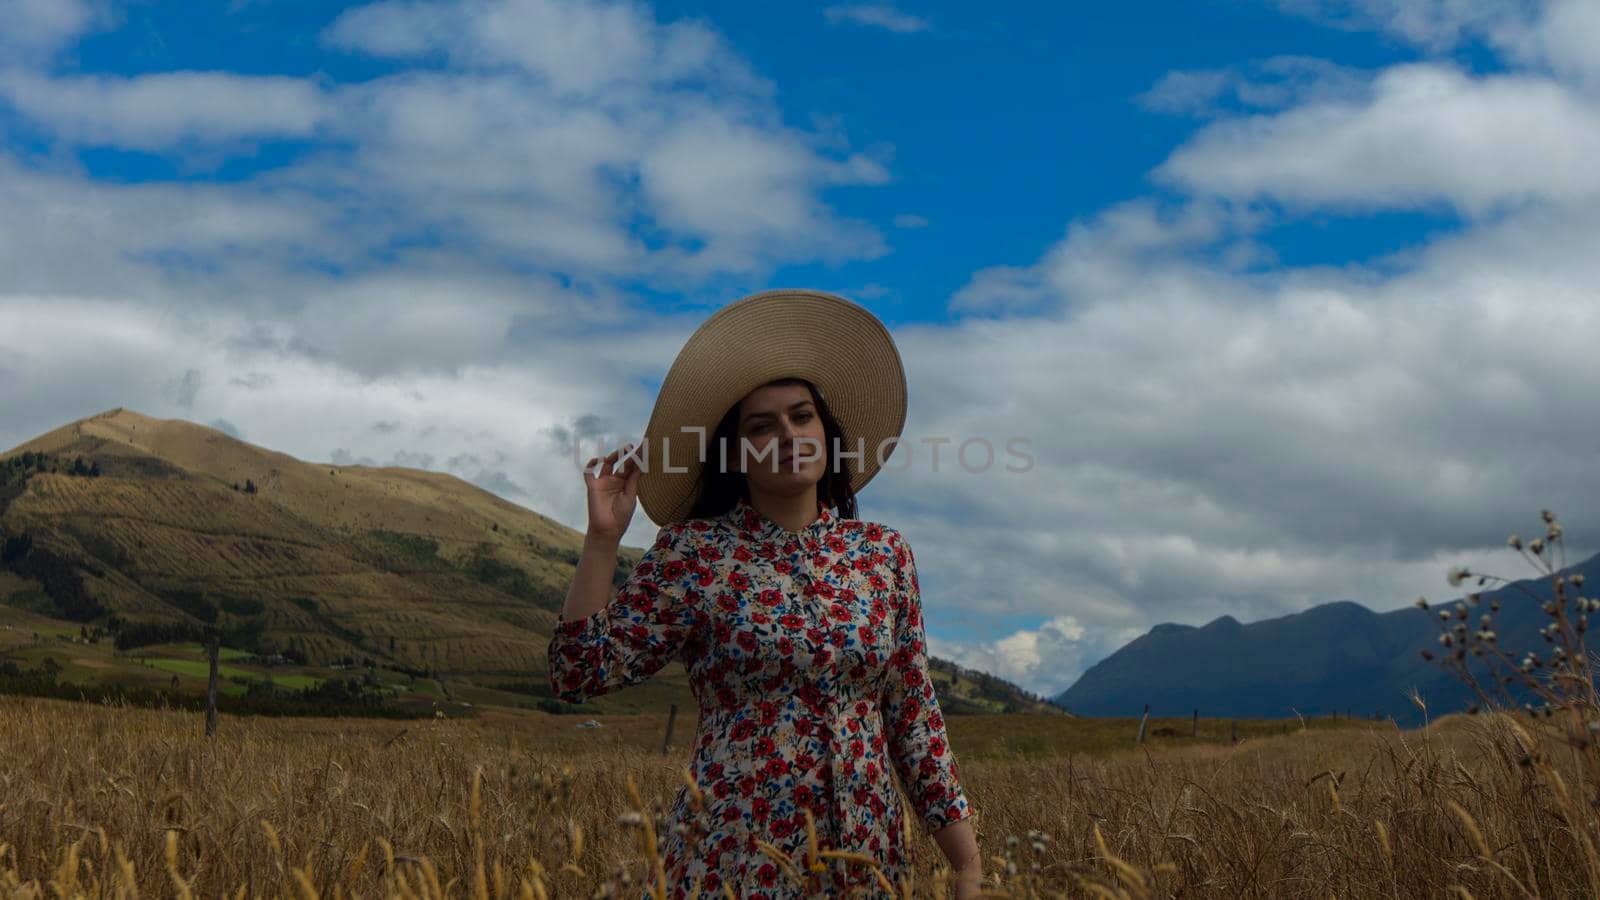 Happy young woman in floral dress holding her hat with her right hand walking alone in the middle of a wheat field seen from the front on a cloudy day with blue sky by alejomiranda